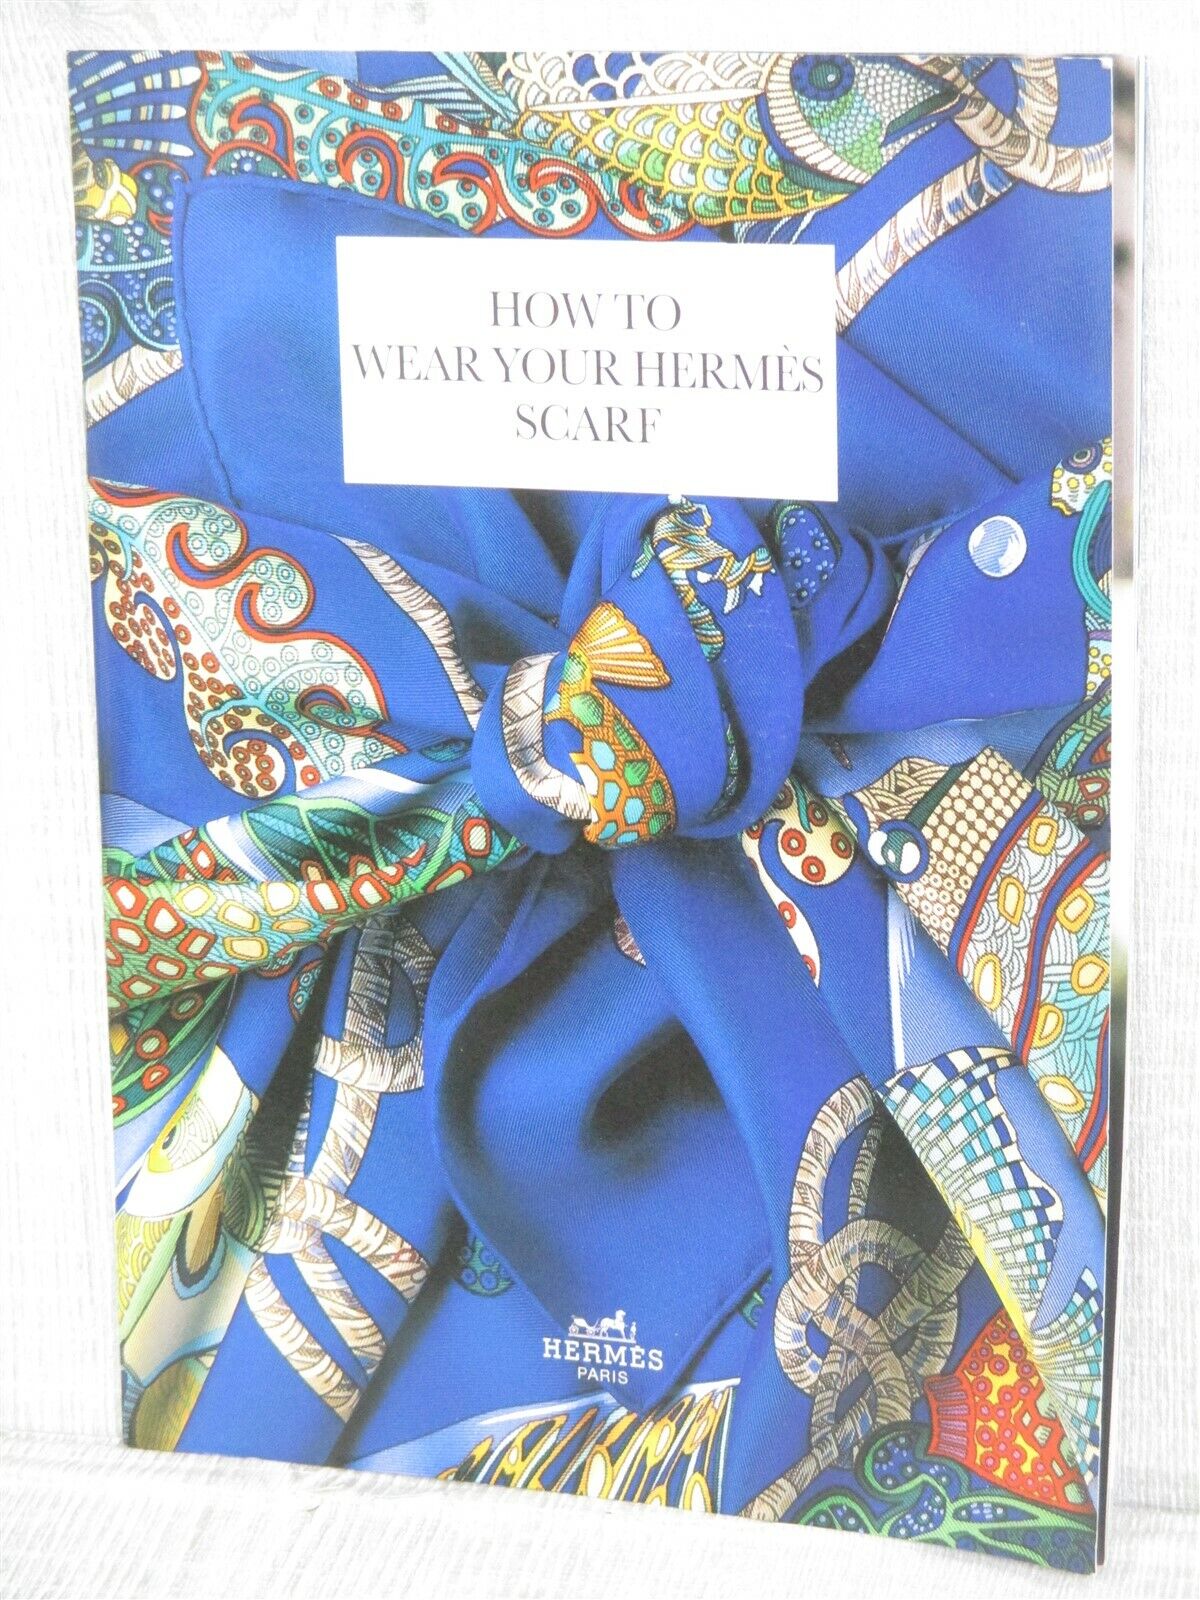 HERMES Carre How to Wear Your Scarf Fashion Mode Fan Photo Book 1994 Ltd Booklet